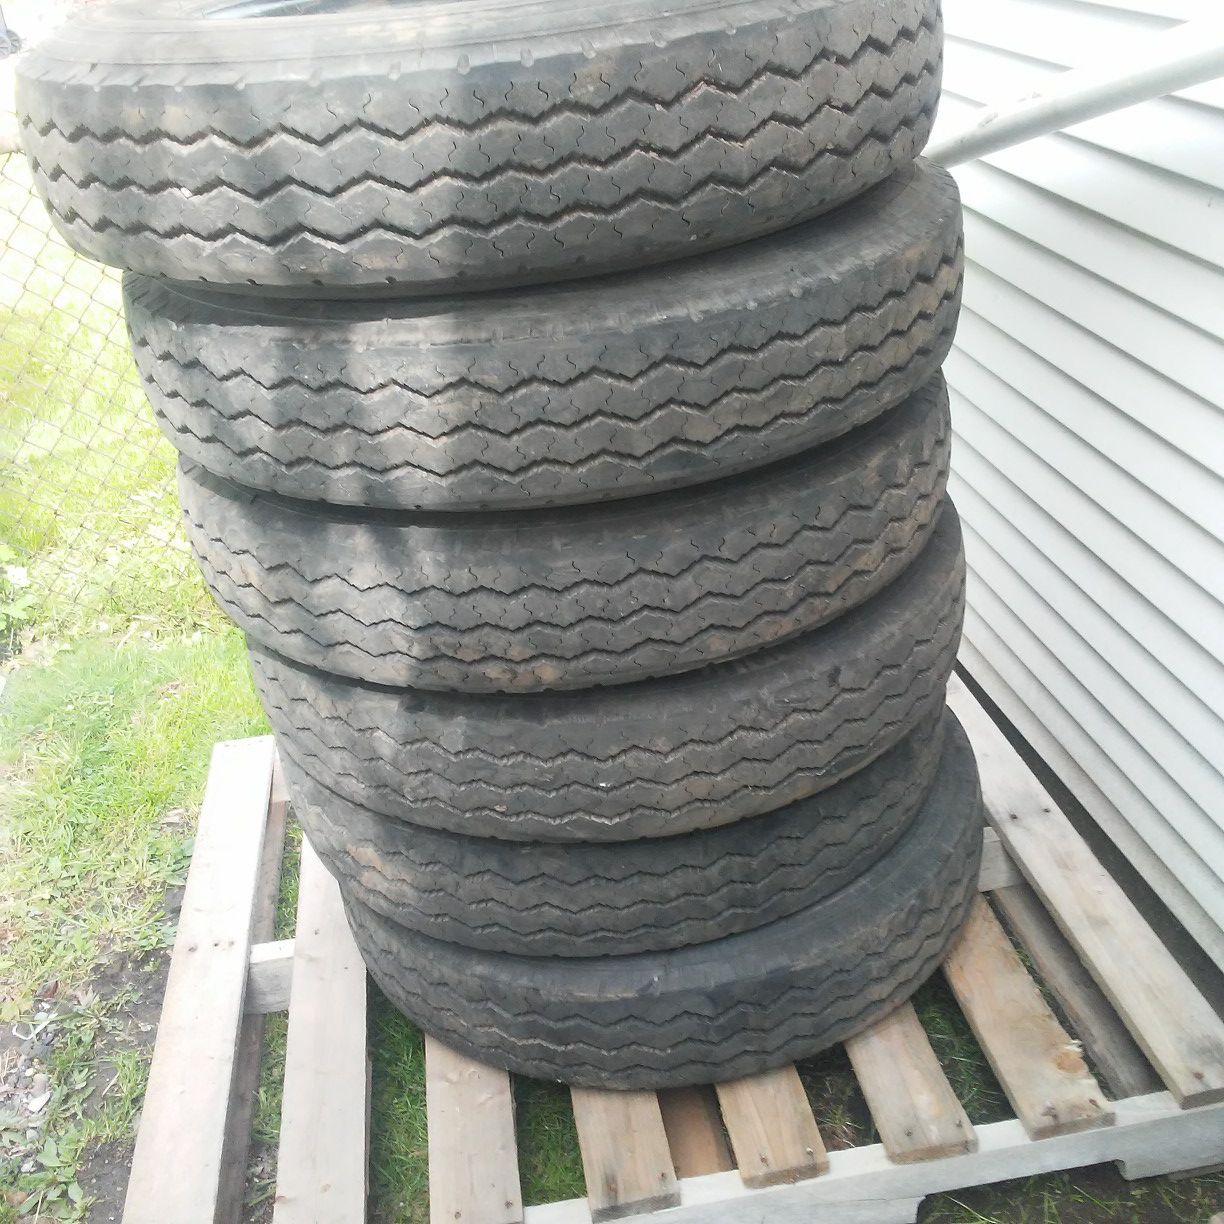 RV Tires. 8R-19.5 Like New